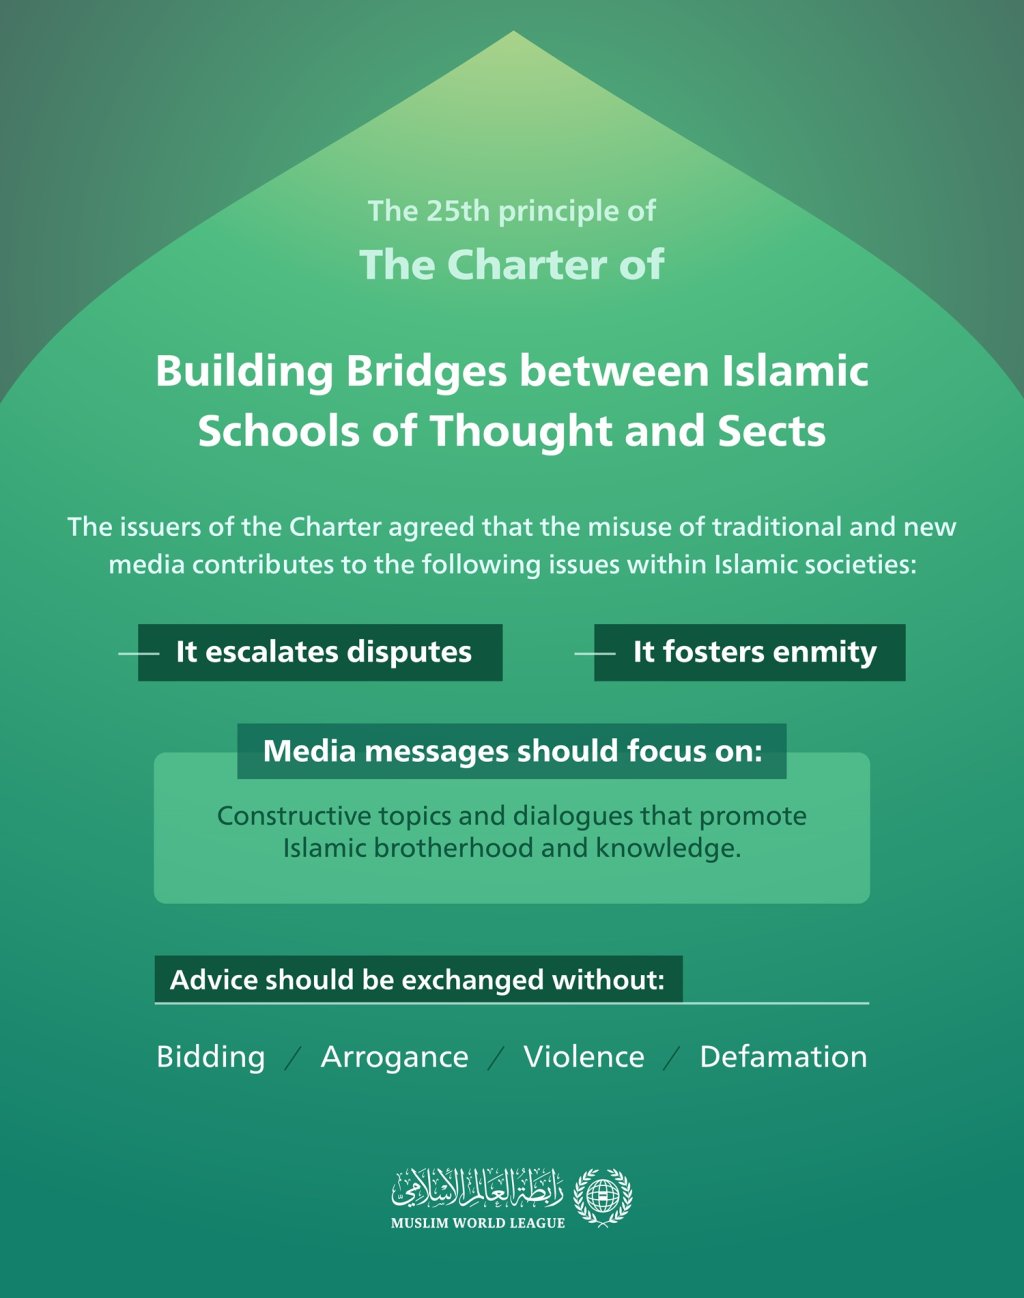 Media and the Escalation of Disputes within Islamic Communities: The Problem and the Solution in the Charter of Building Bridges between Islamic Schools of Thought and Sects.